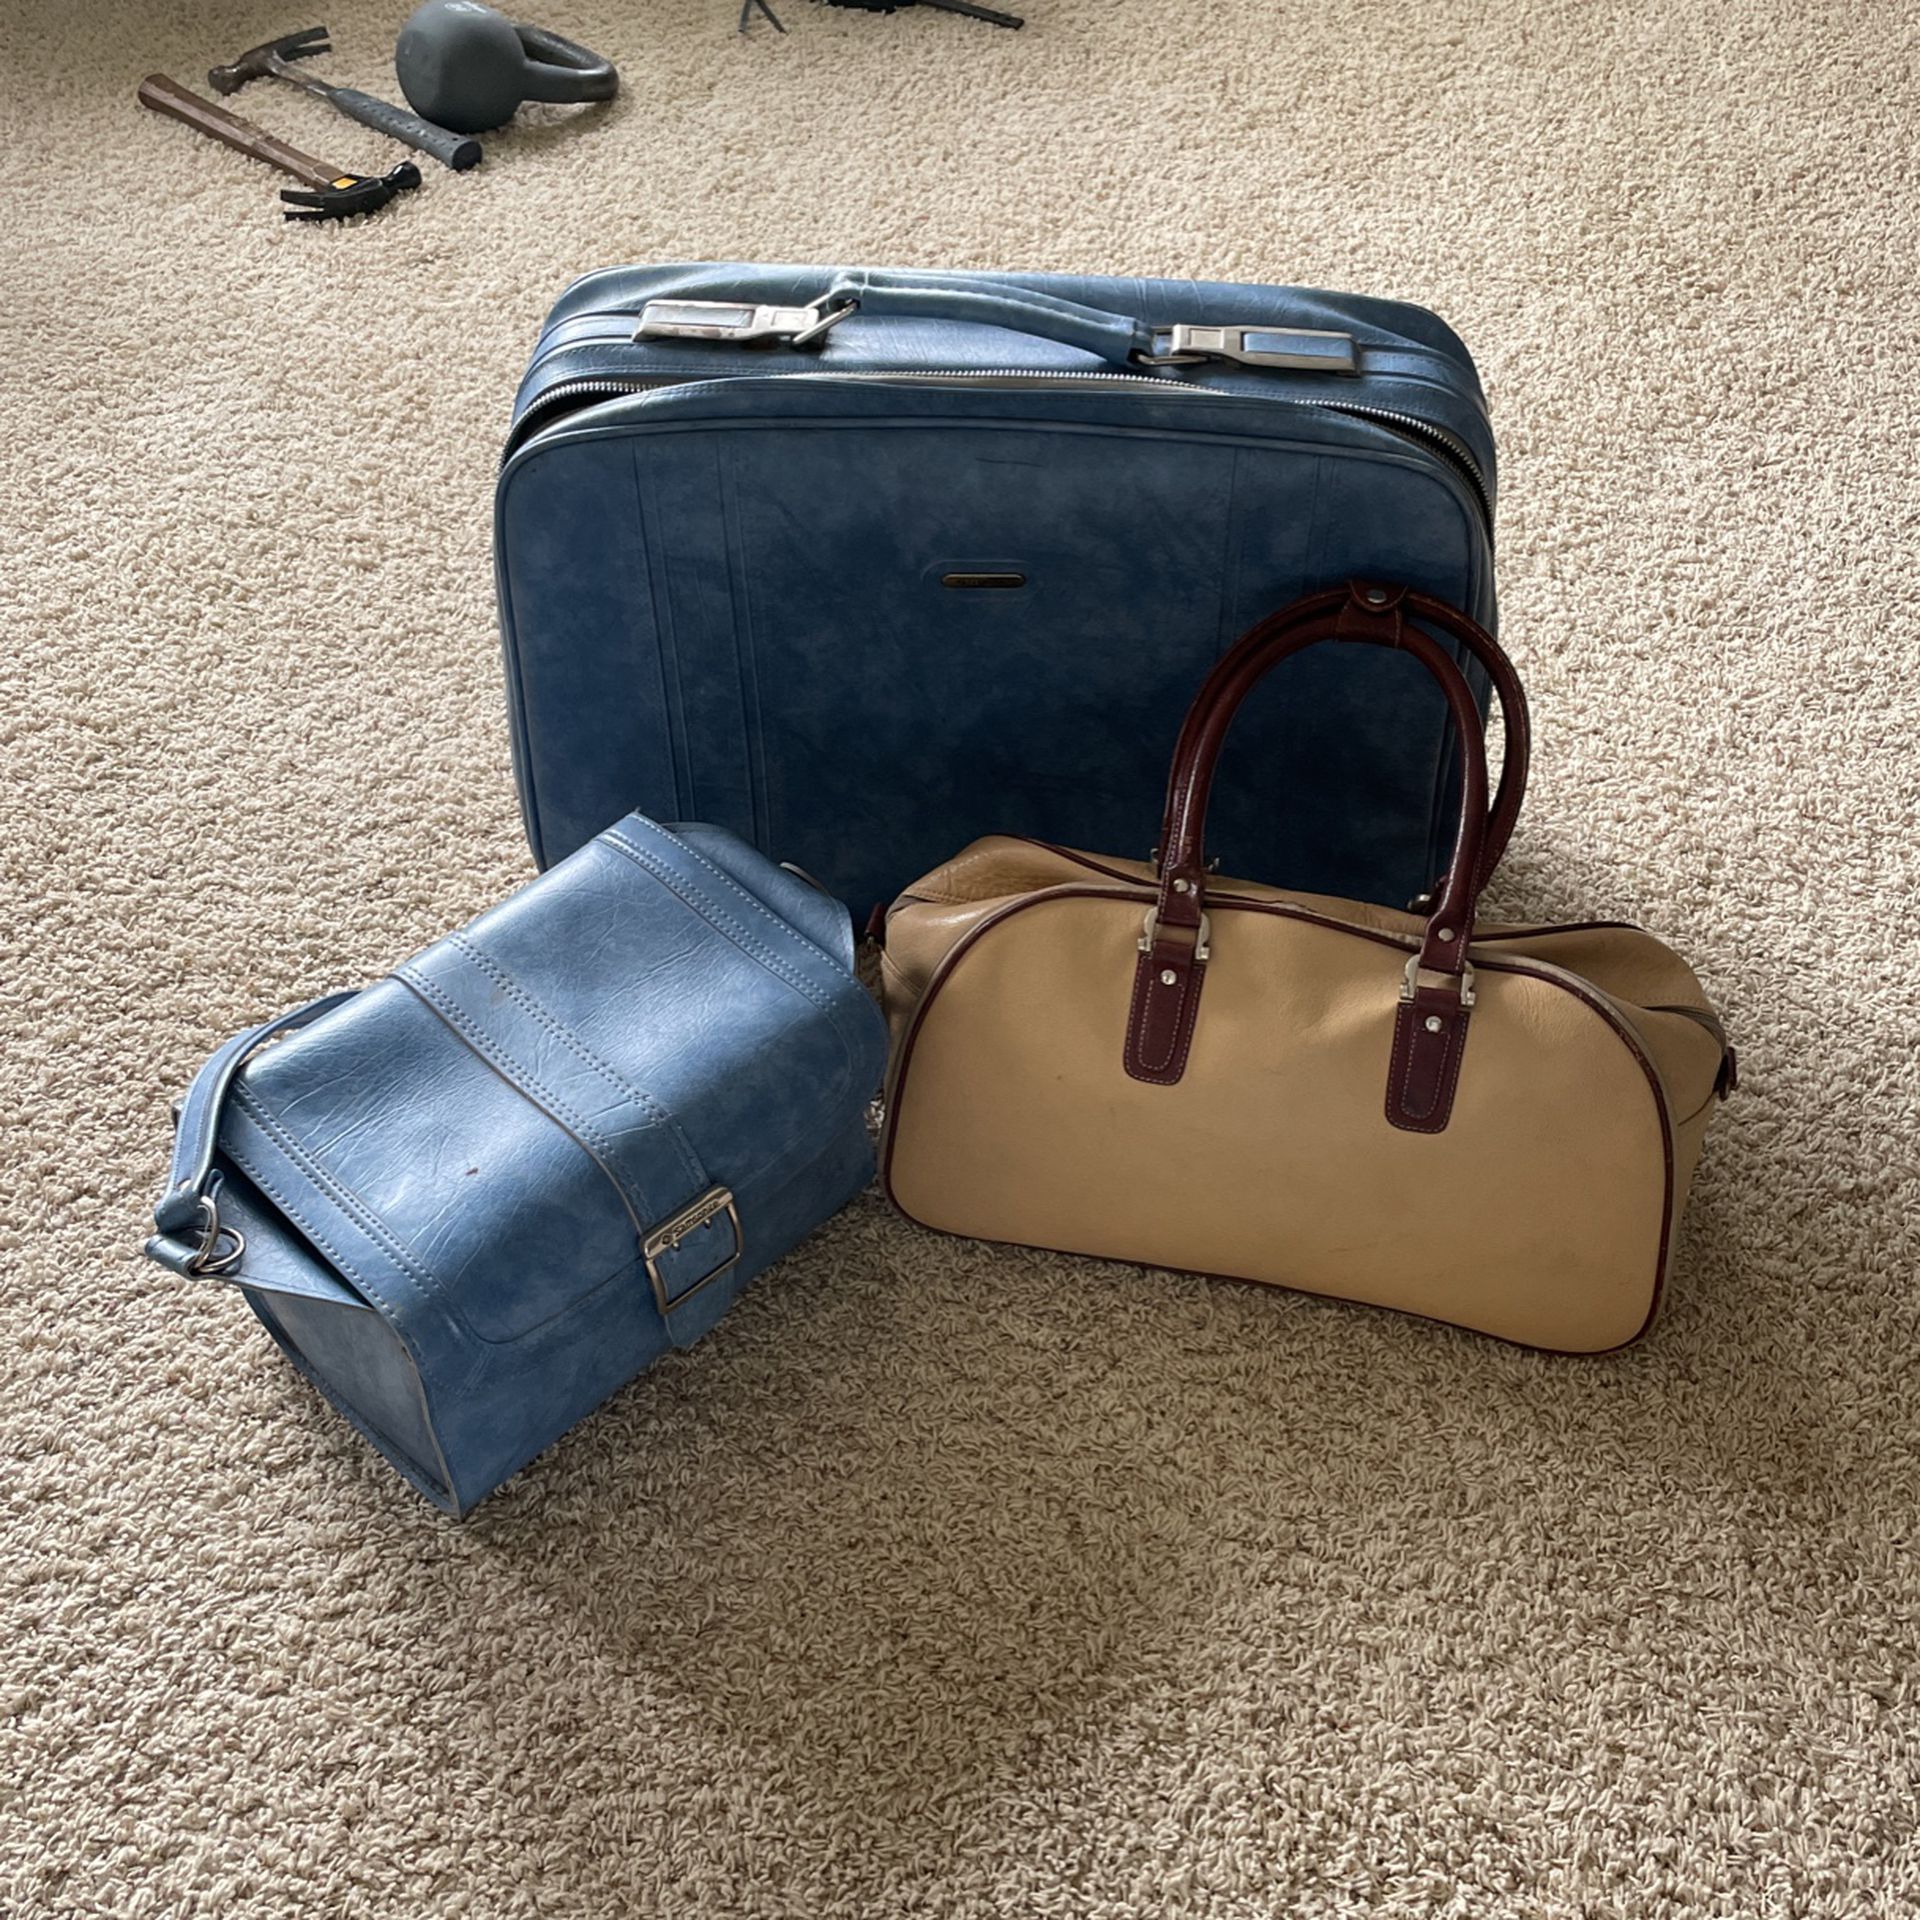 Vintage Suitcase And Carry-ons